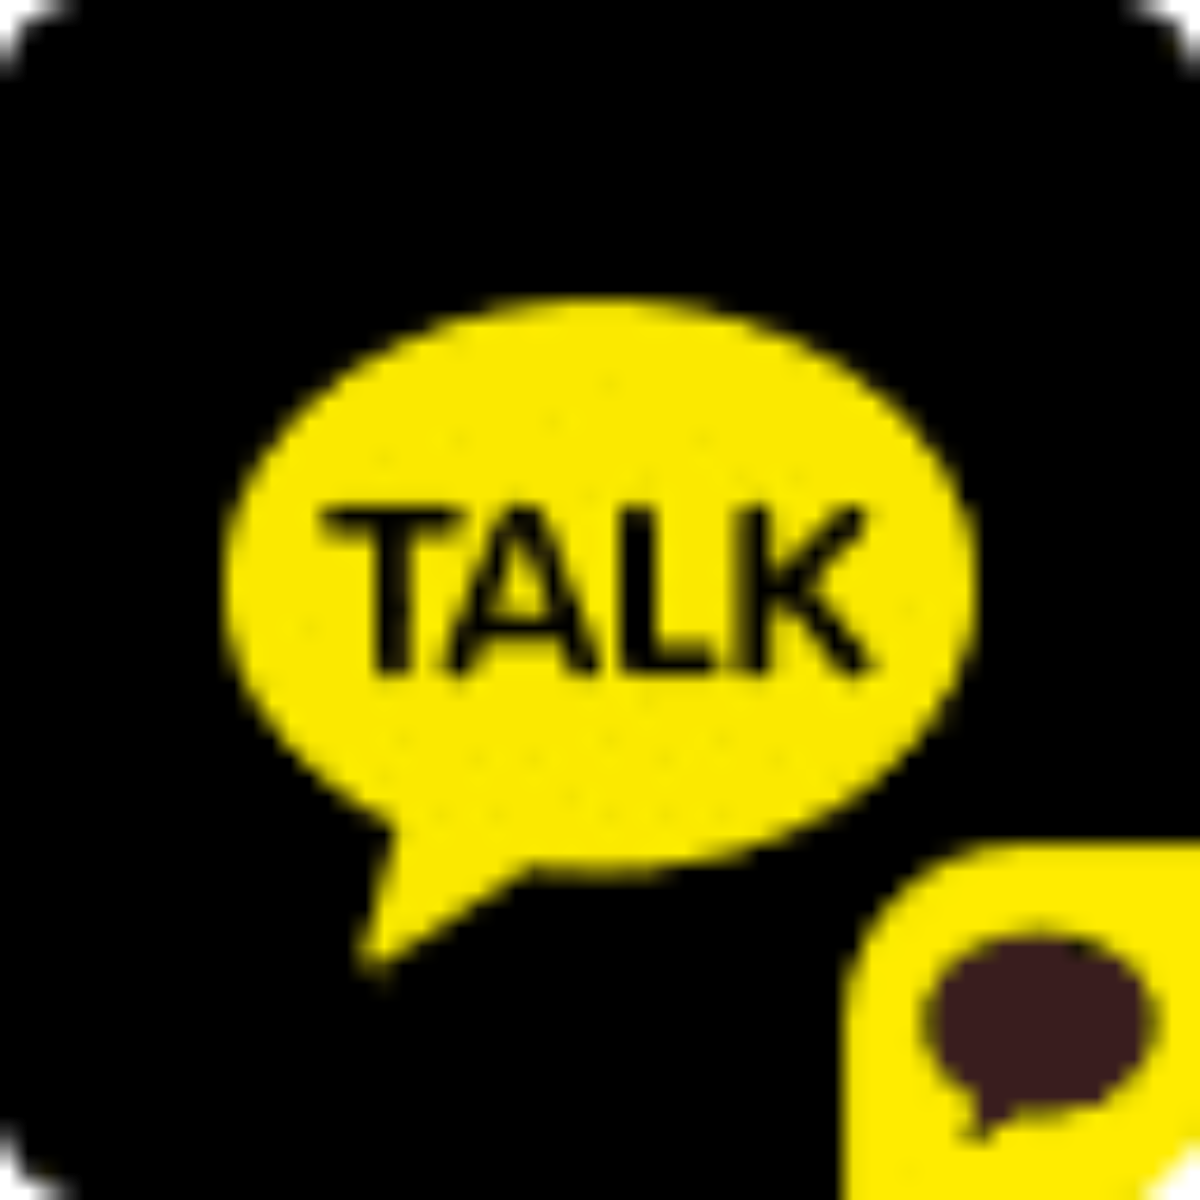 download kakaotalk for pc new version